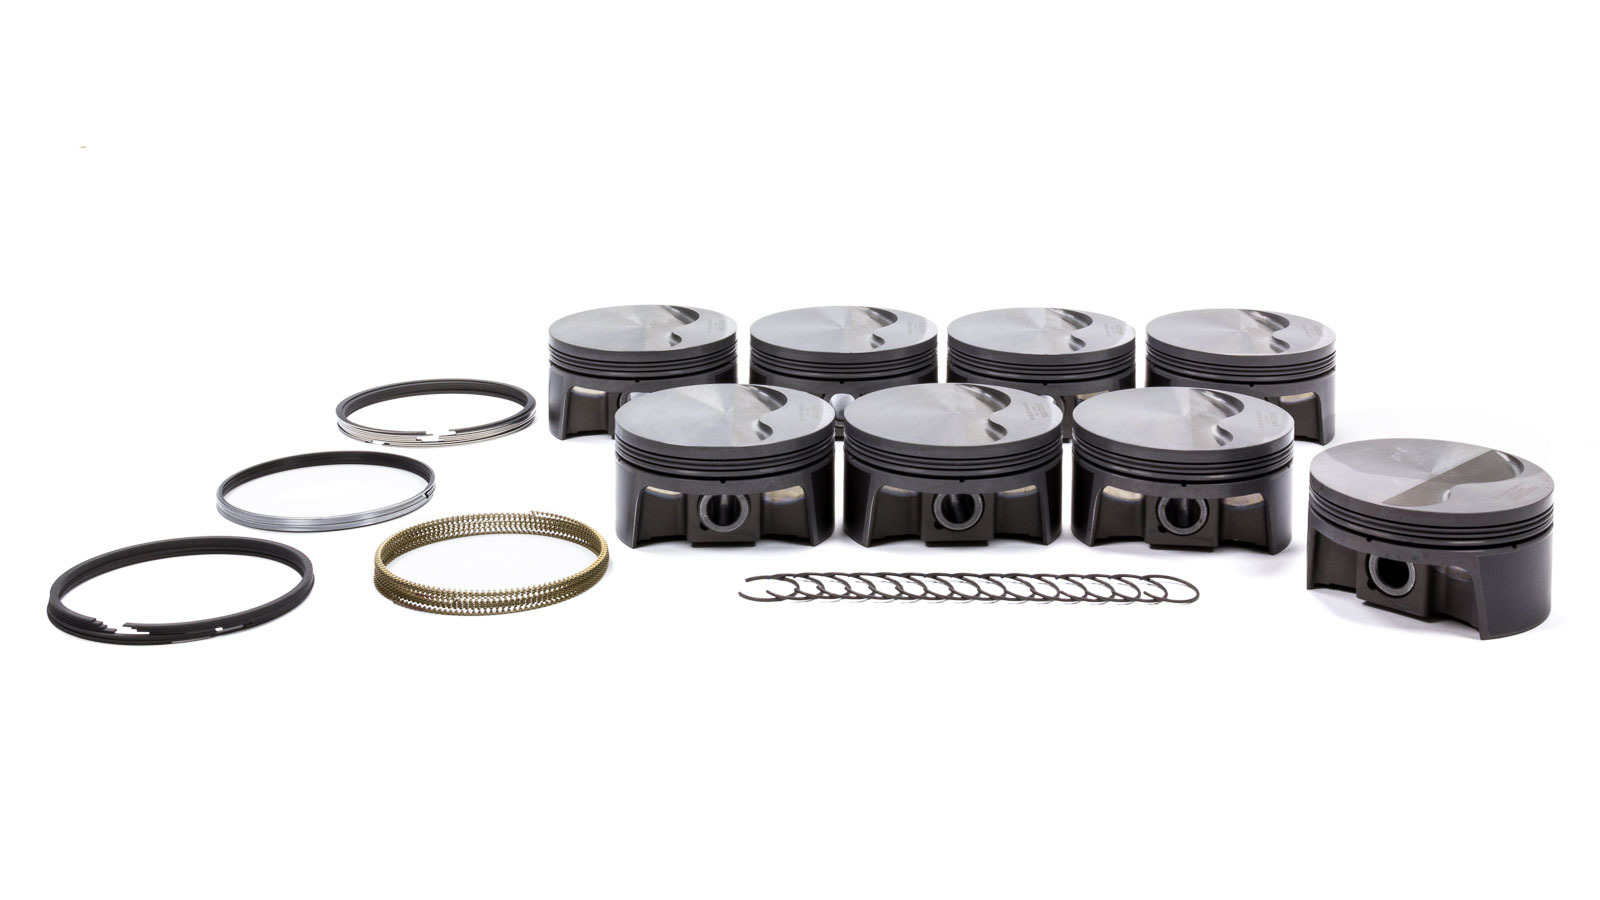 Mahle Pistons 930223070 Piston and Ring, PowerPak, Forged, 4.070 in Bore, 1.0 x 1.0 x 2.0 mm Ring Groove, Minus 4.00 cc, GM LS-Series, Kit